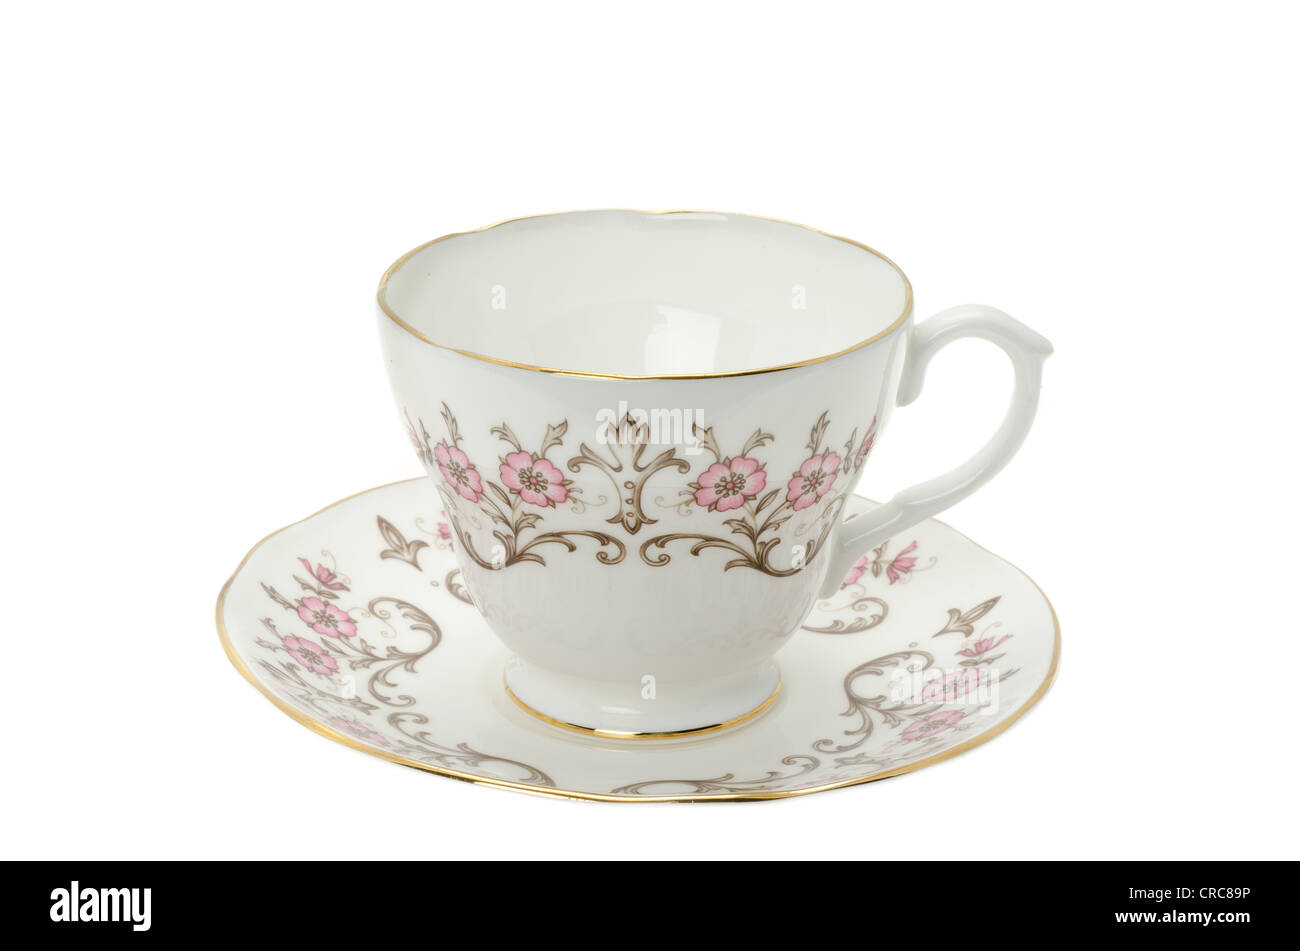 An ornate patterned bone china tea cup and saucer on a white background - studio shot Stock Photo